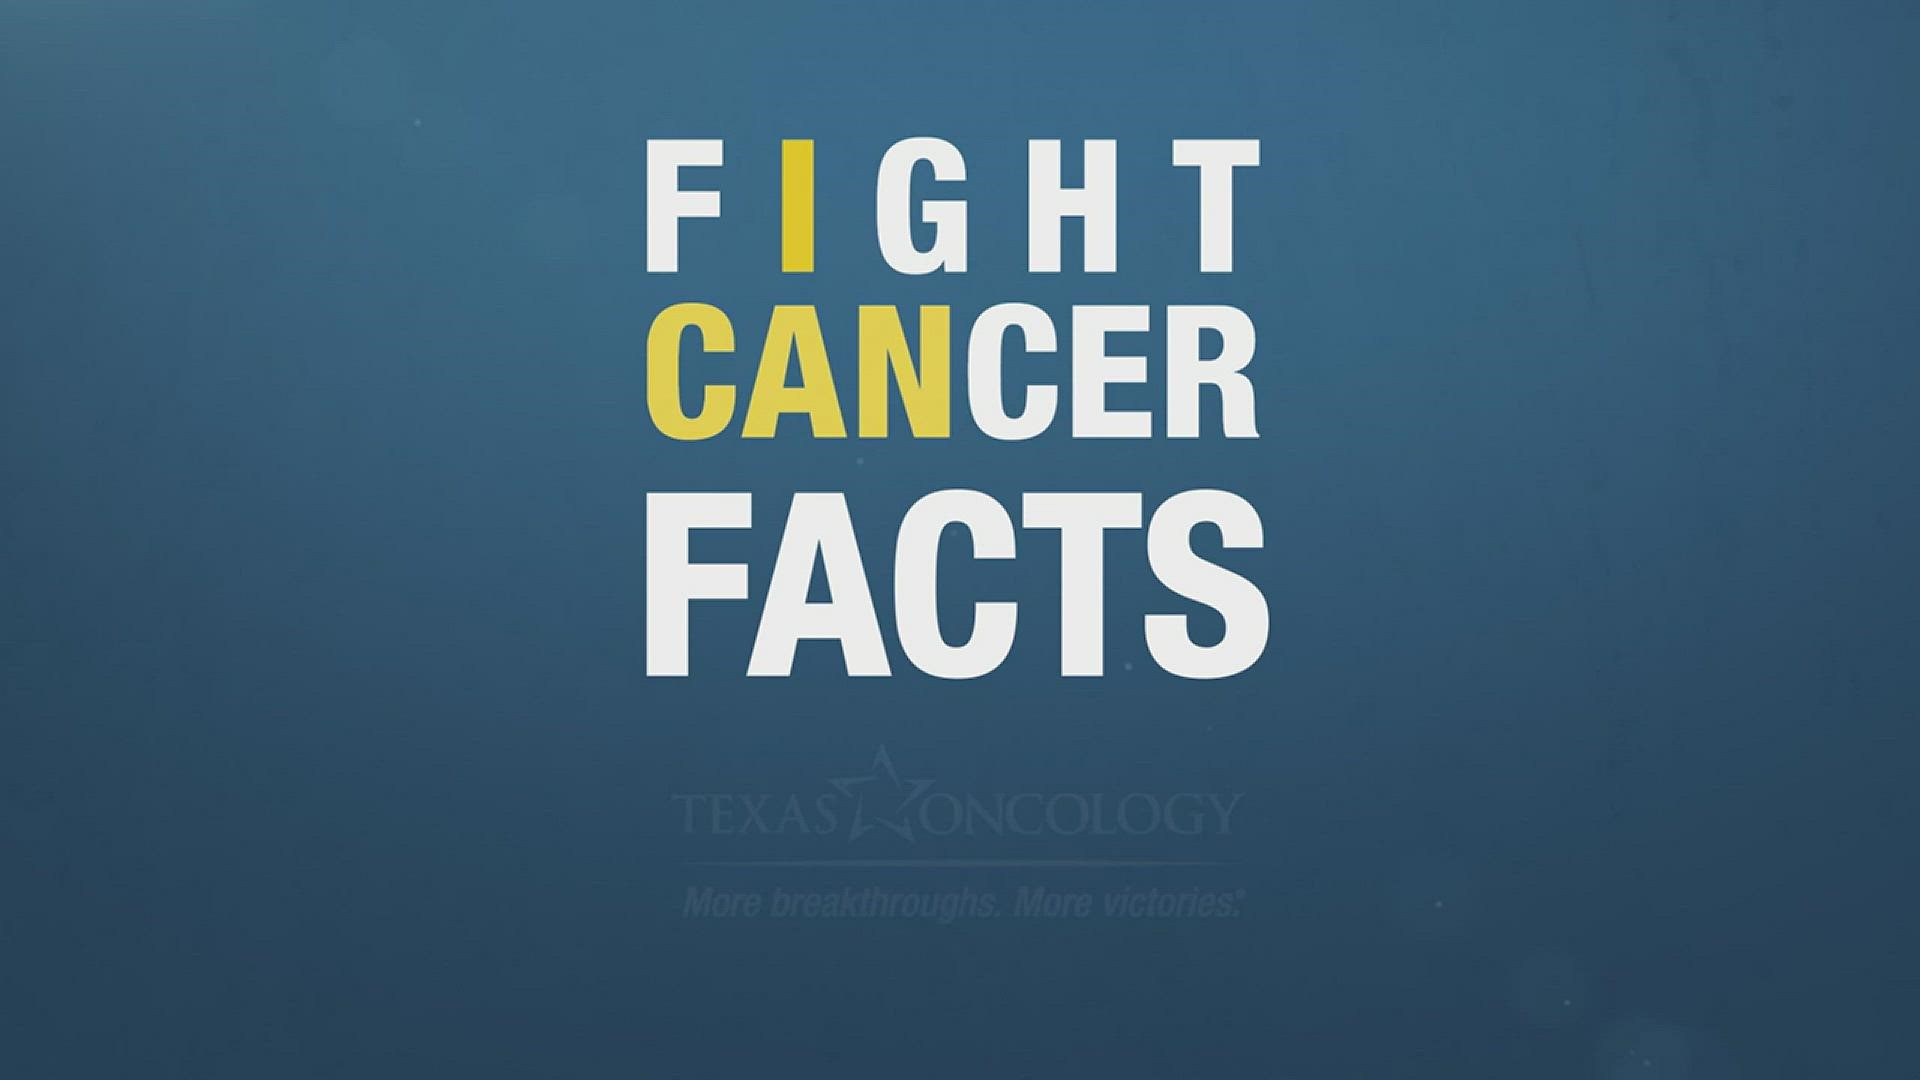 Local Texas Oncology doctor explains why it is important to assess your inherited cancer risk.